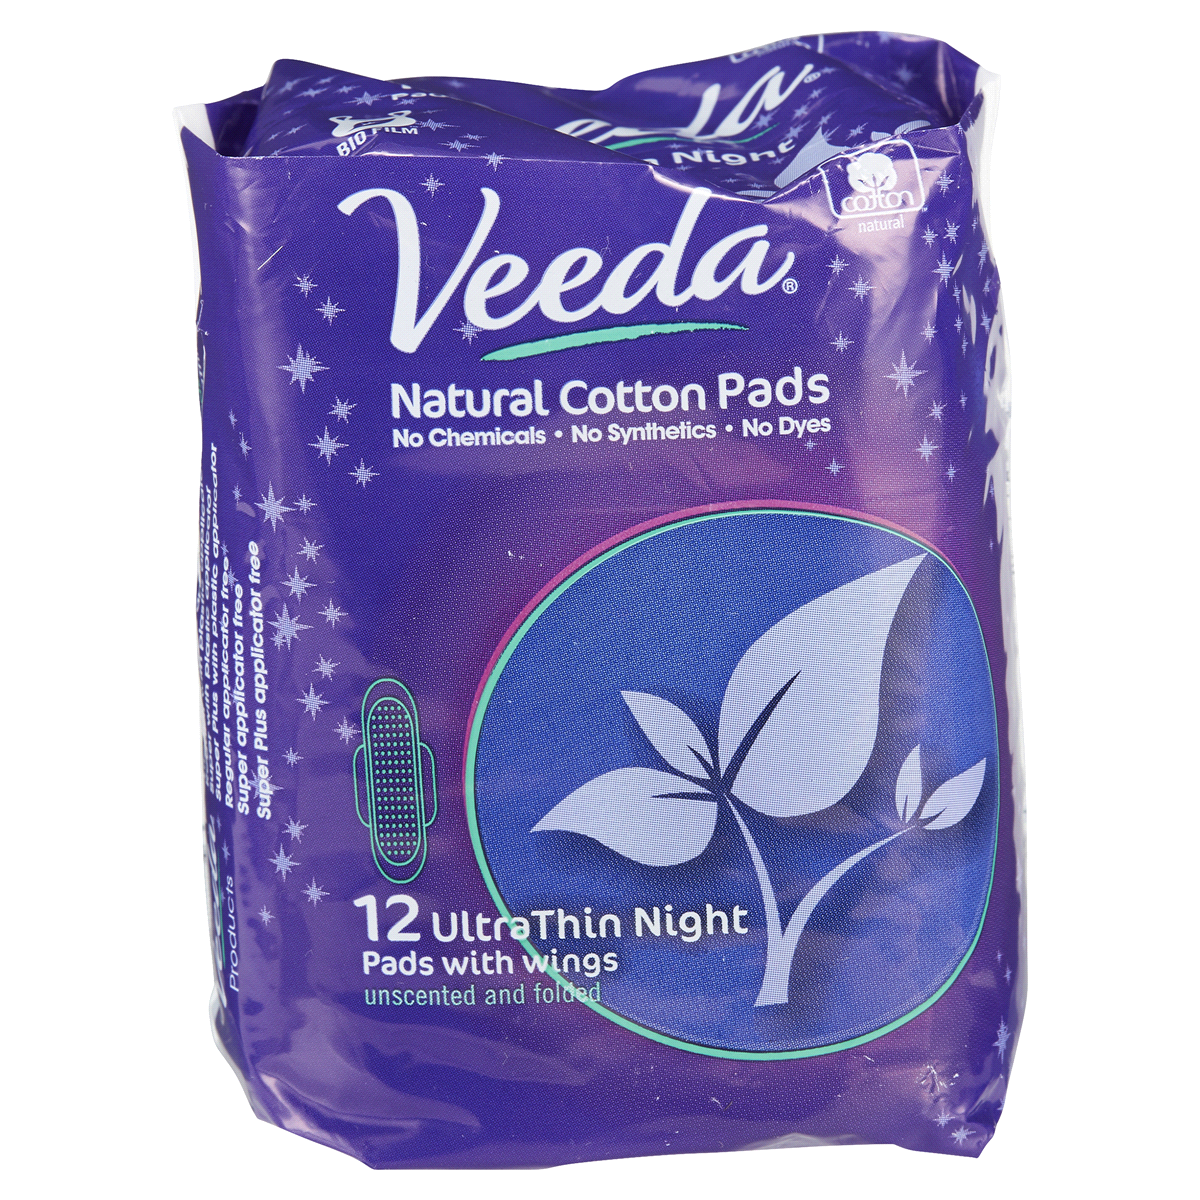 Veeda Pads With Wings Ultra Thin Night Unscented 12 ct